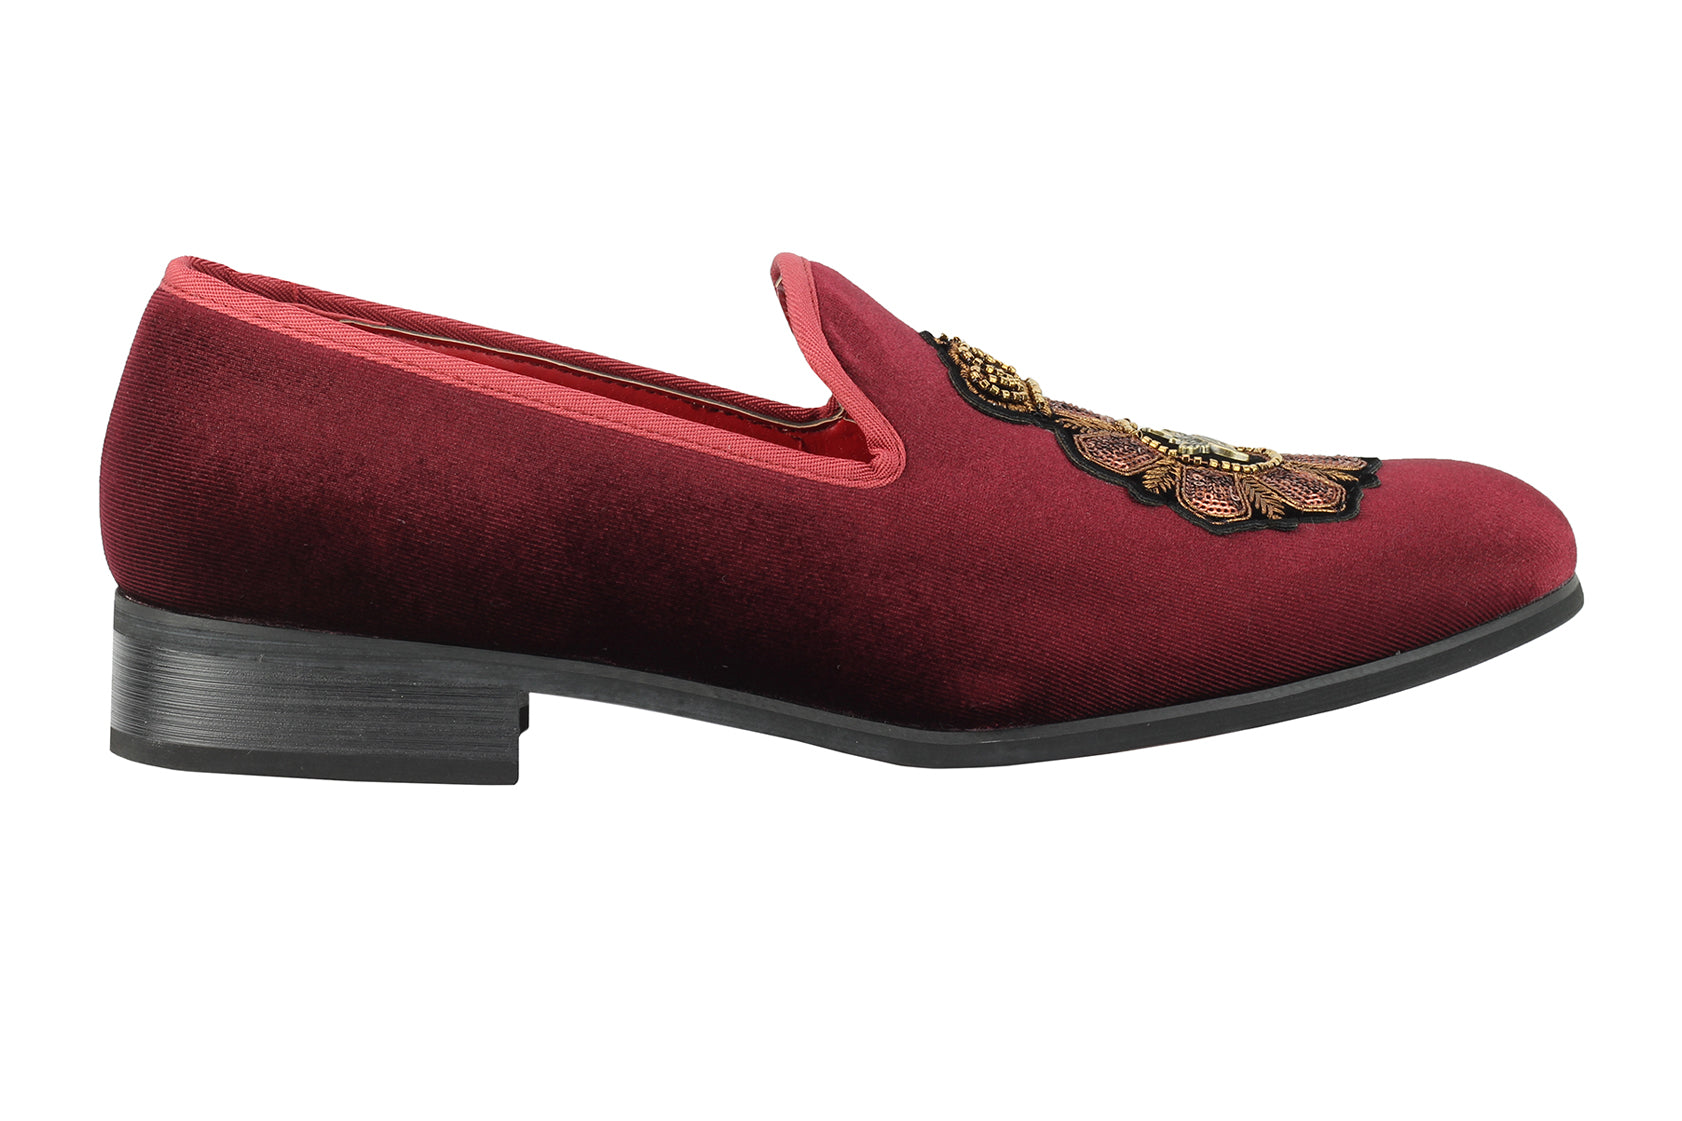 Mens Velvet Loafers Bee Crown Embroidered Vintage Dress Shoes Slip On Slippers Maroon